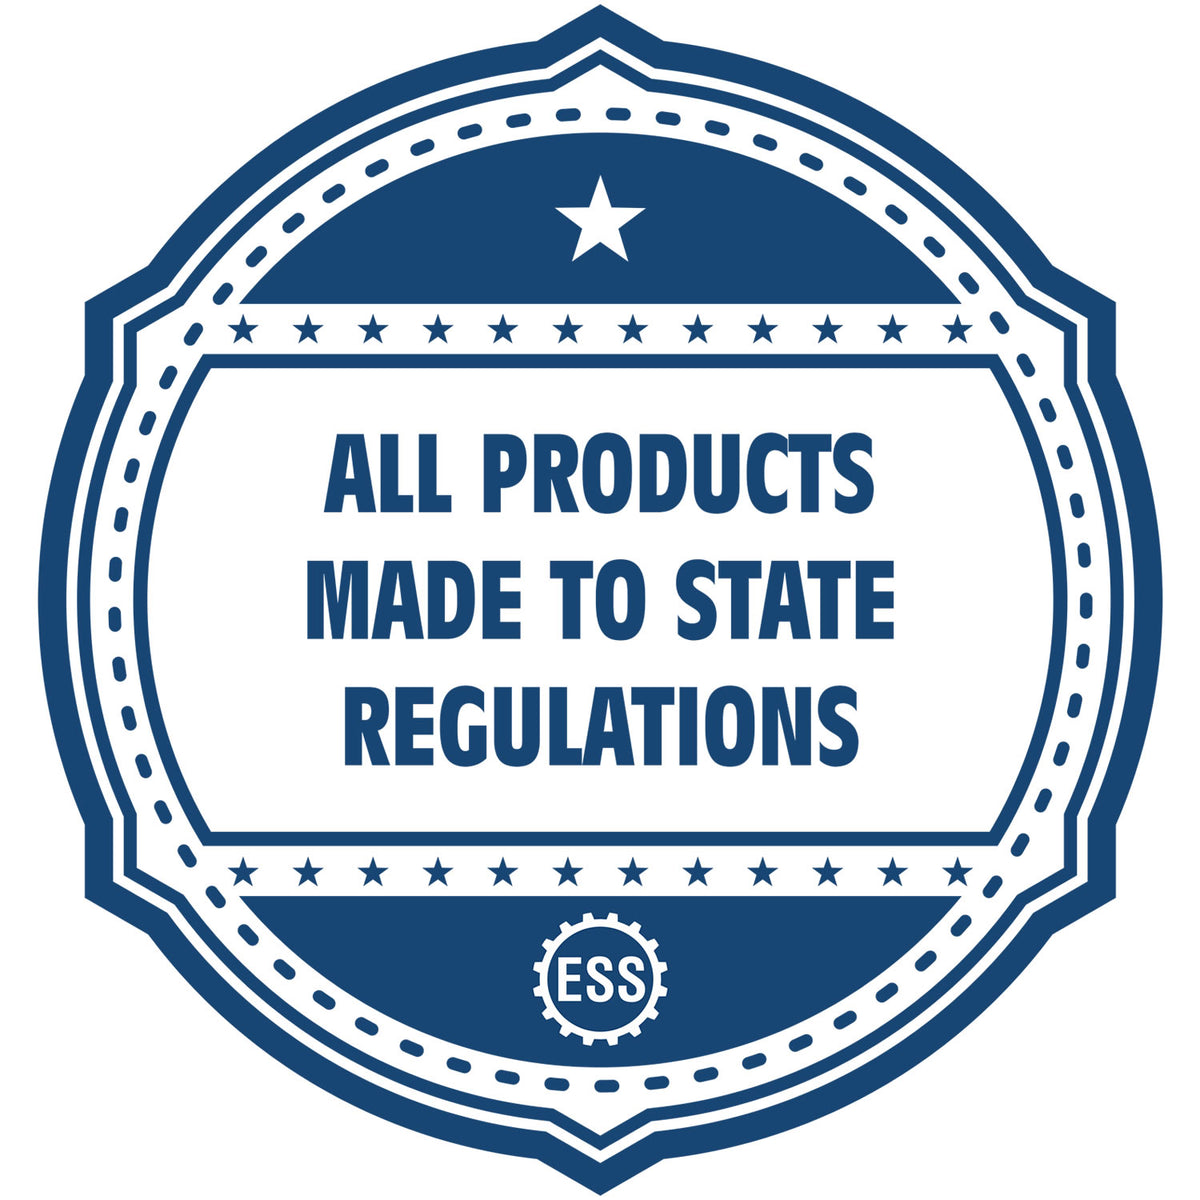 An icon or badge element for the Self-Inking Pennsylvania PE Stamp showing that this product is made in compliance with state regulations.